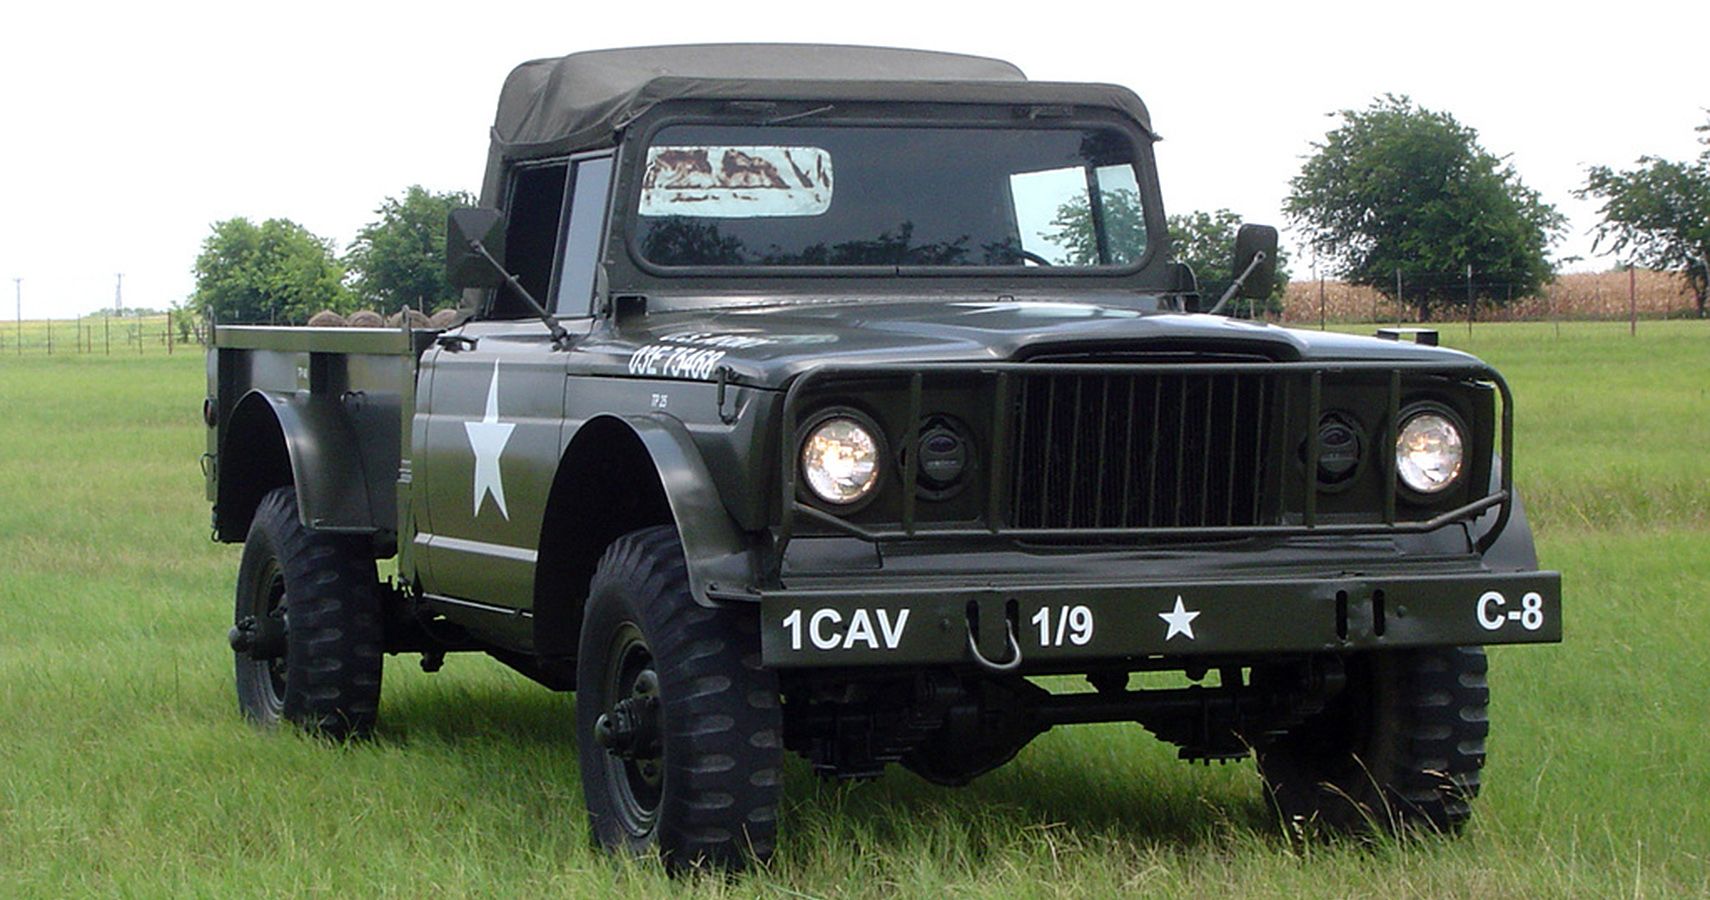 Kaiser Jeep M715: Approximately $8,000